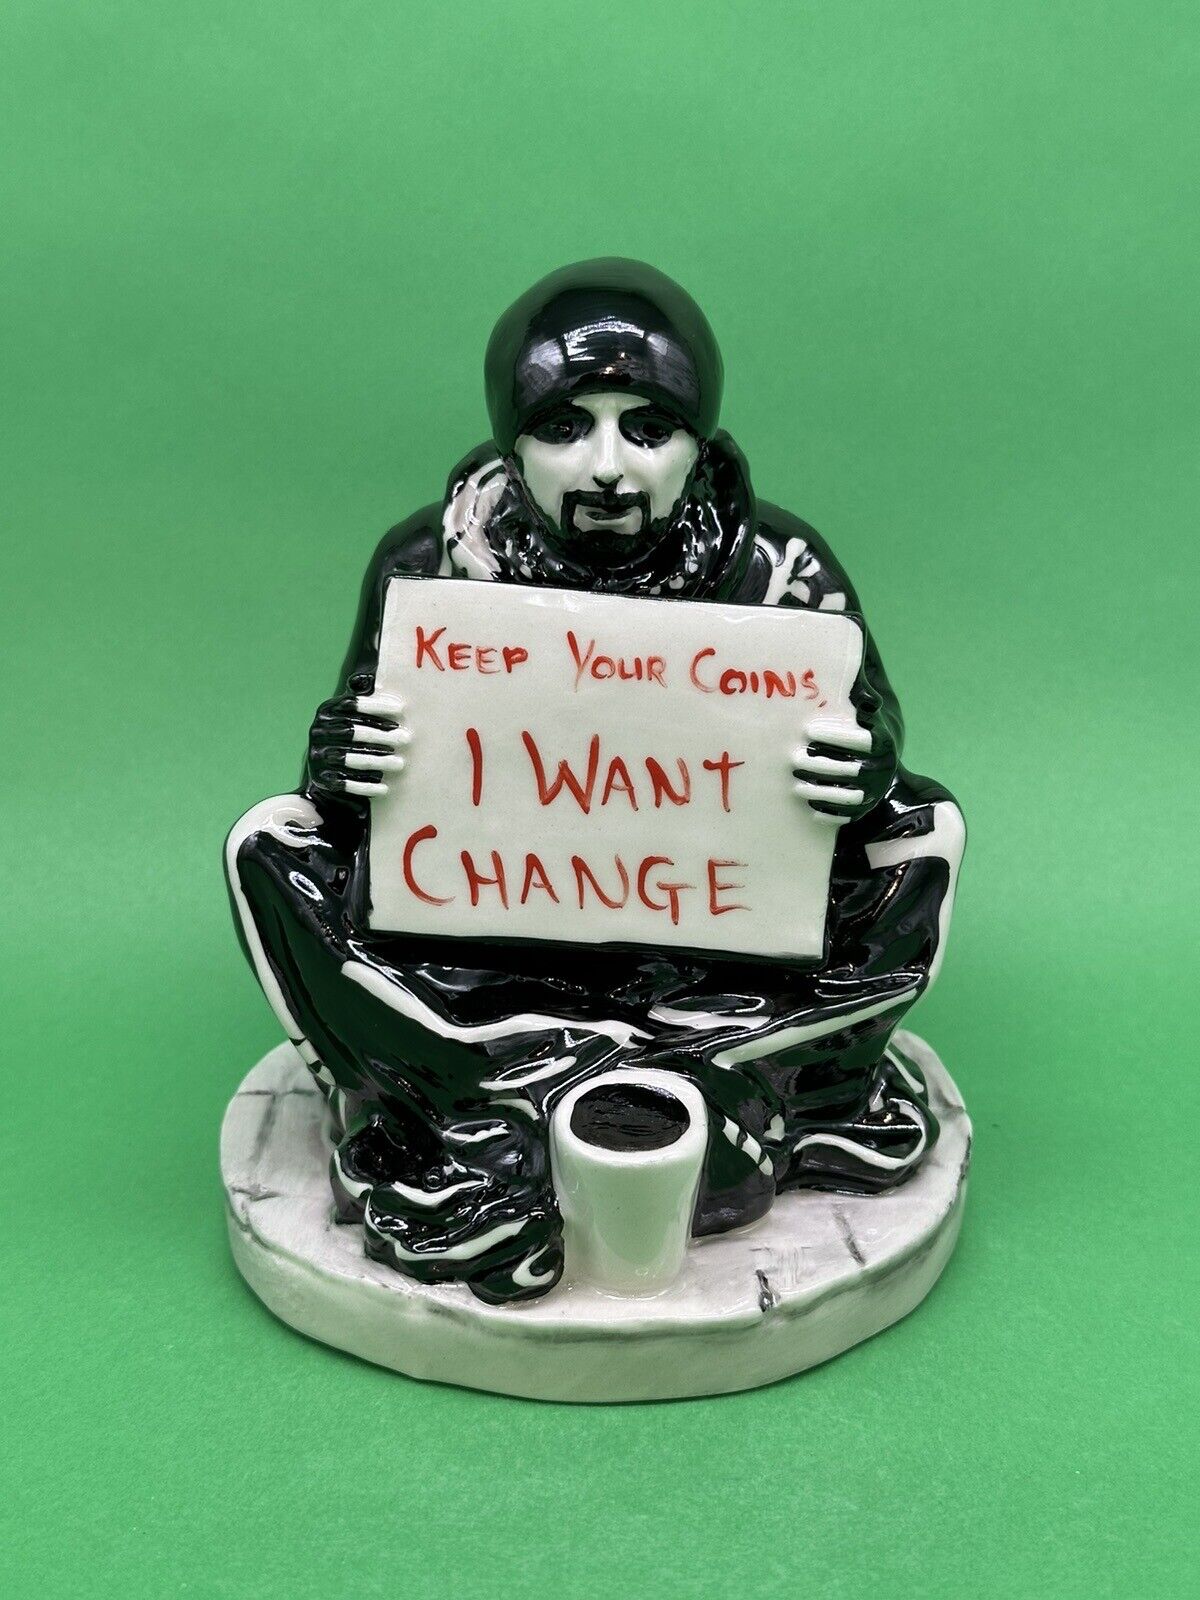 Banksy Street Art by Kevin Francis, \'Keep Your Coins, I WANT CHANGE\' *NEW* 5.5\